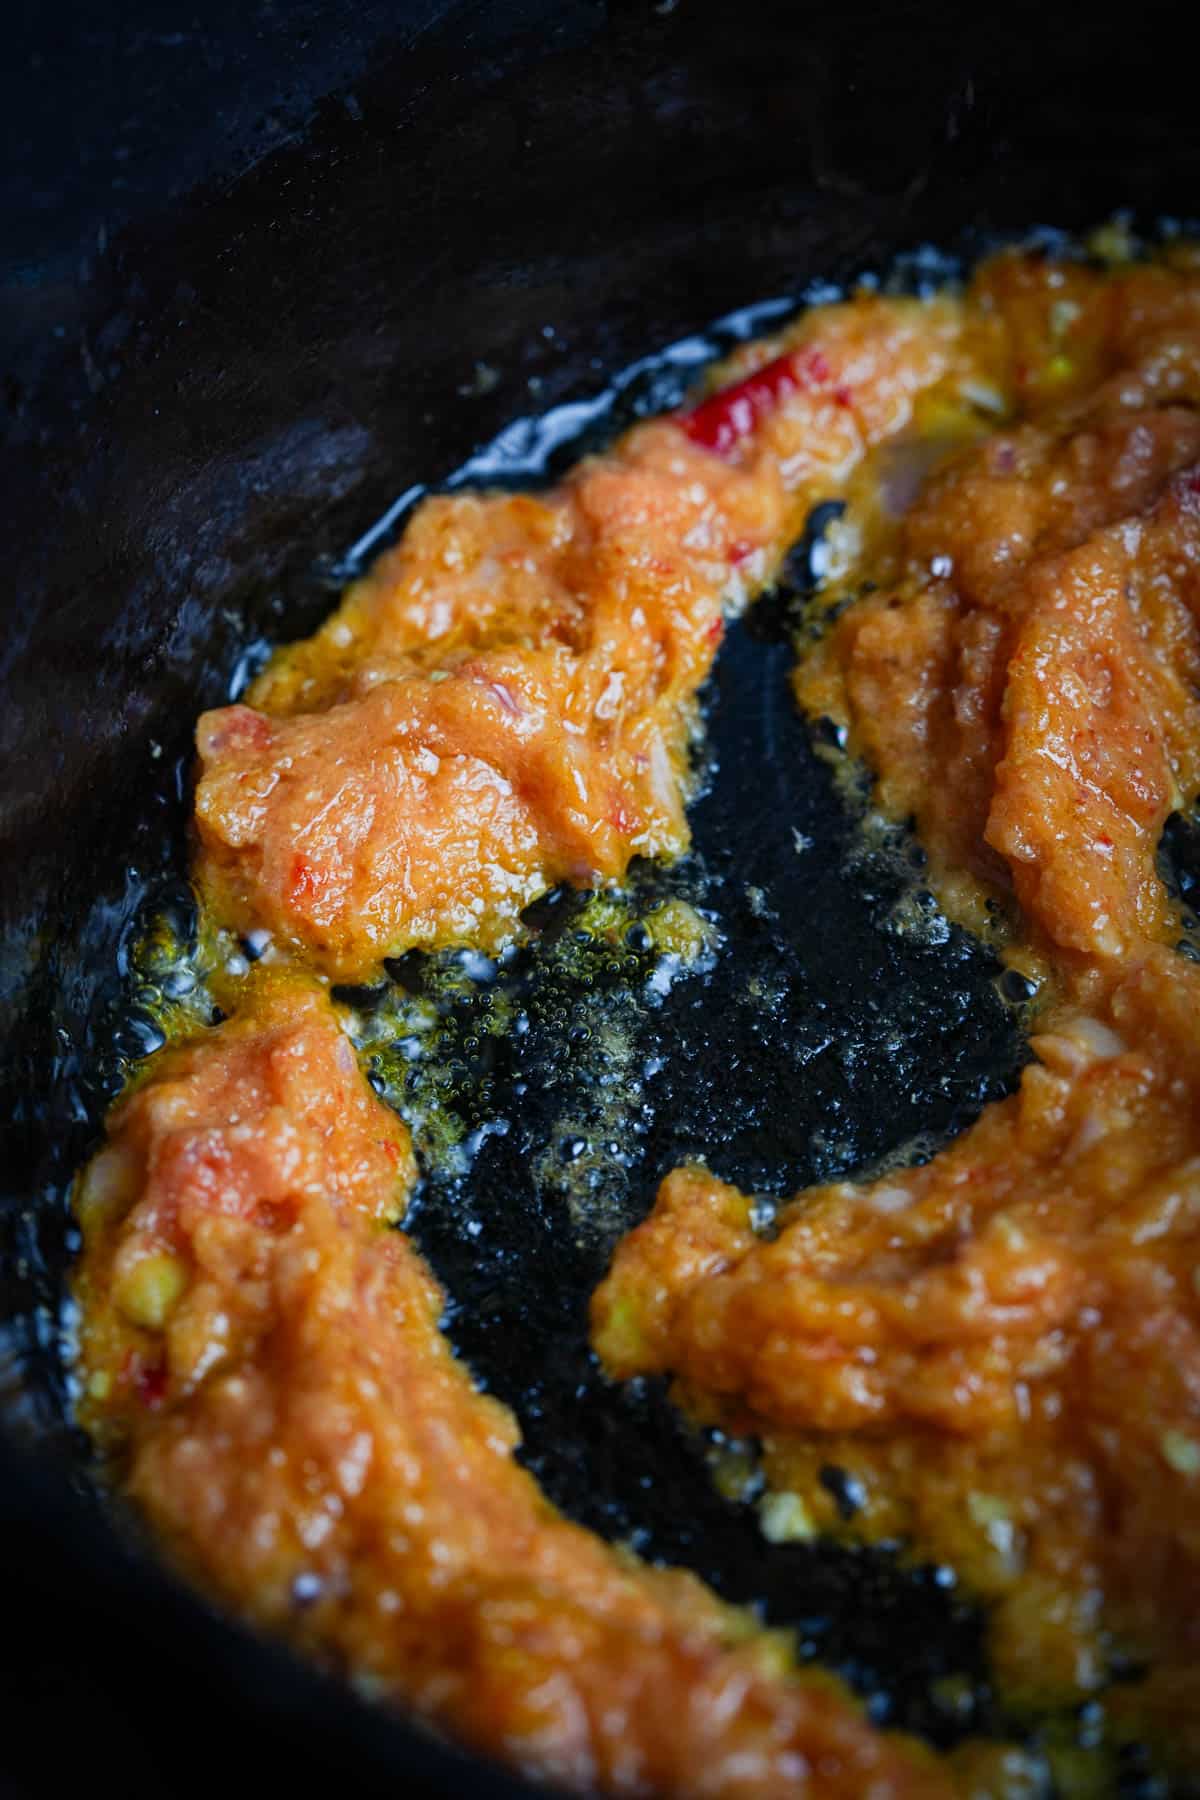 A frying pan with sambal frying in it.